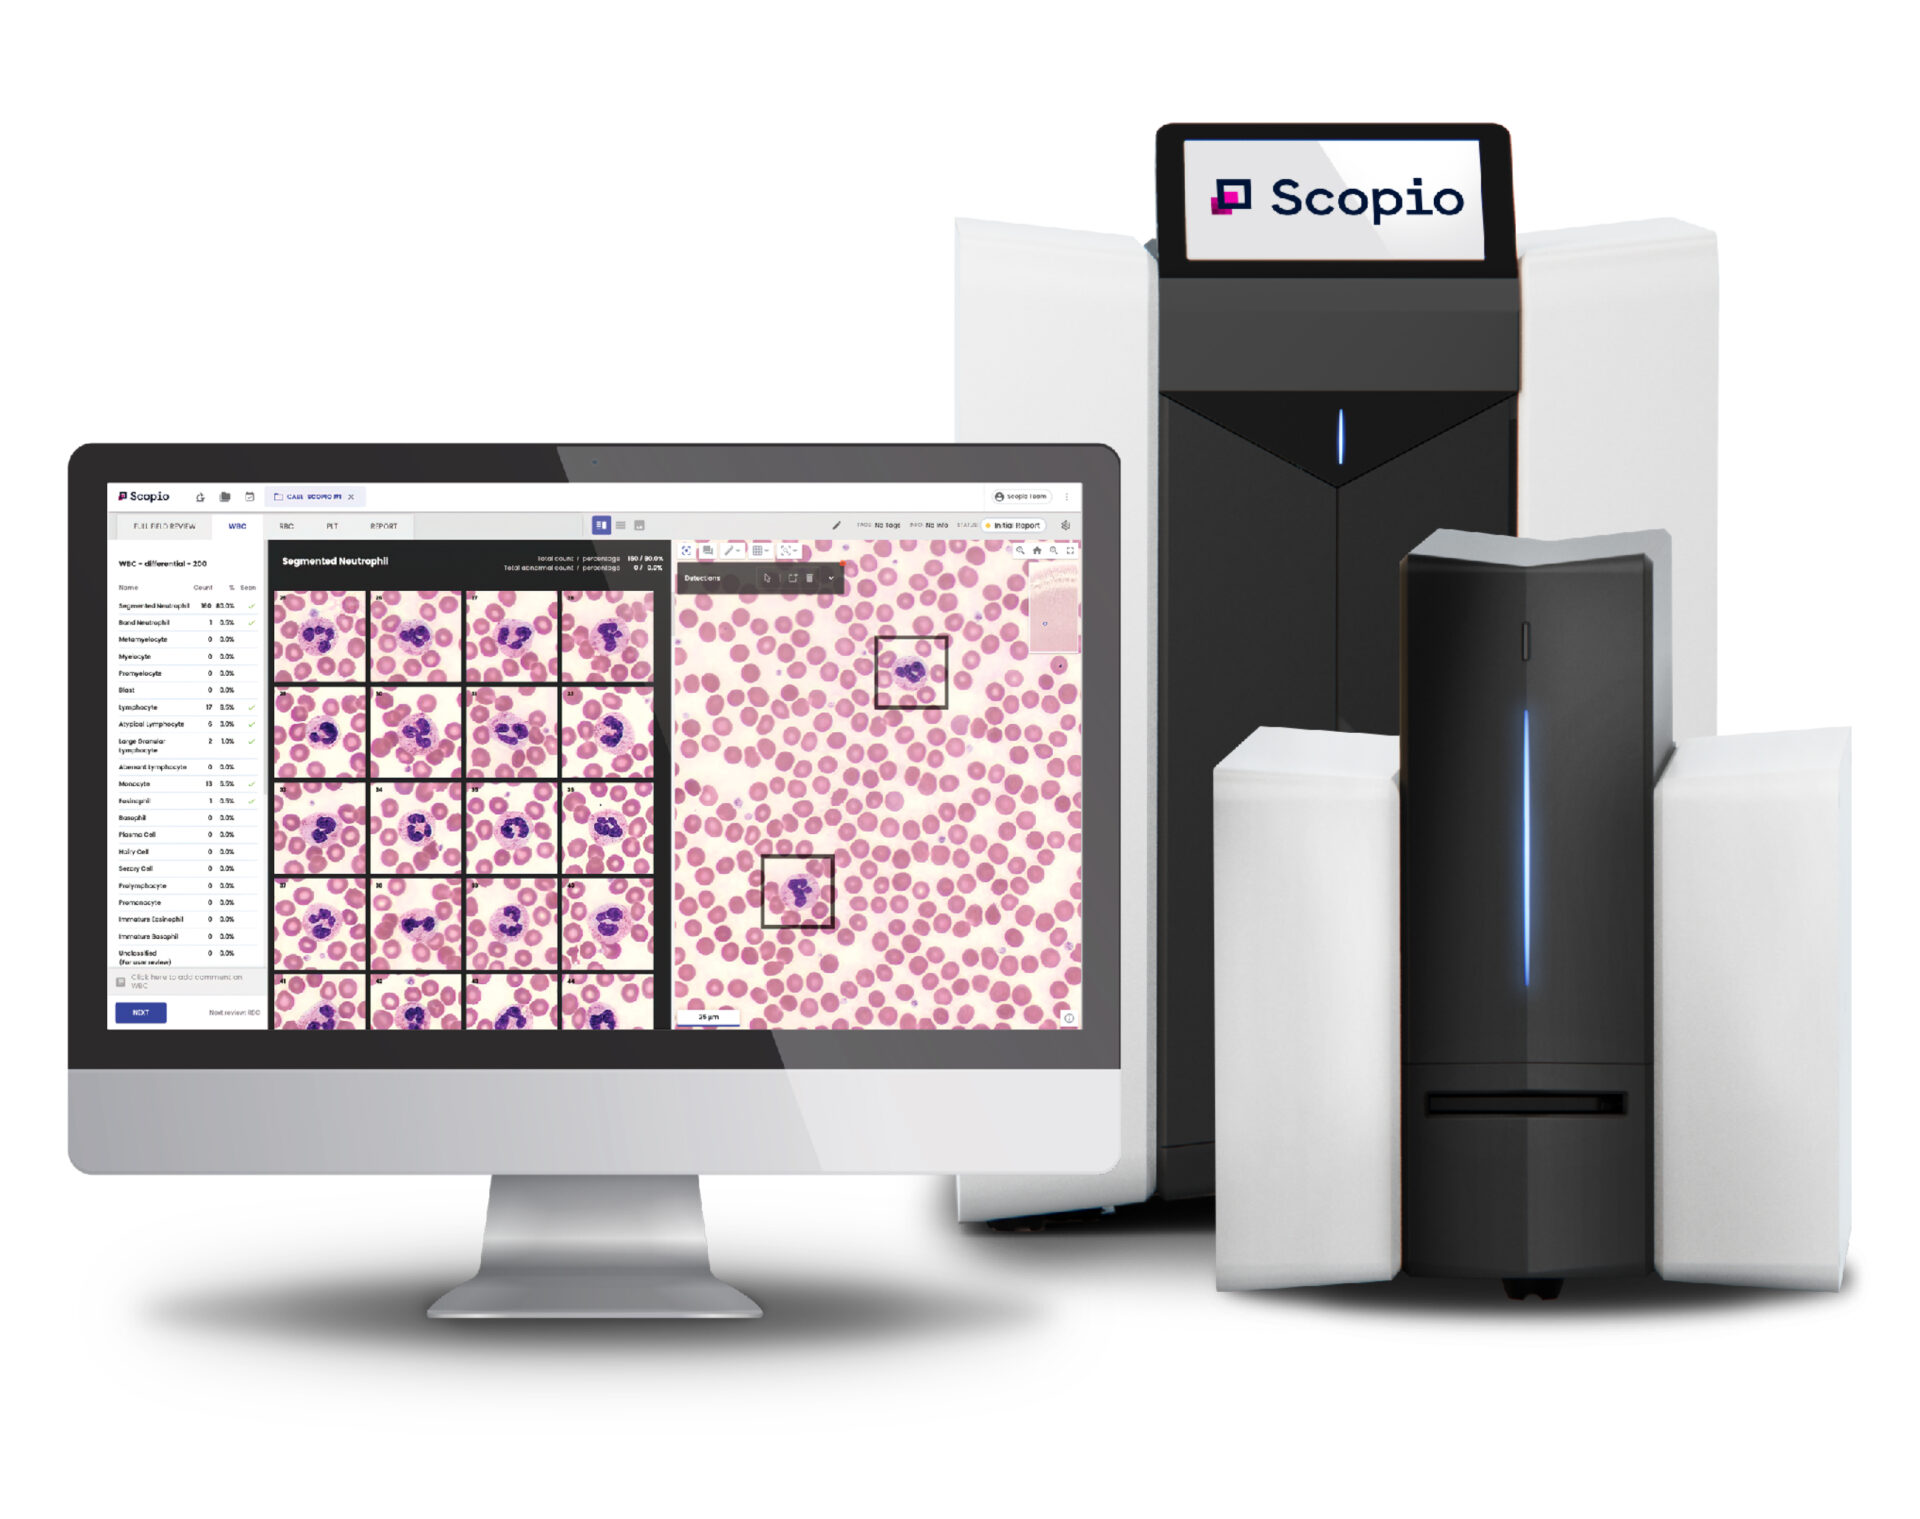 Siemens Healthineers Enters into Agreement with Scopio Labs to Distribute Full-Field Digital Cell Morphology Technology